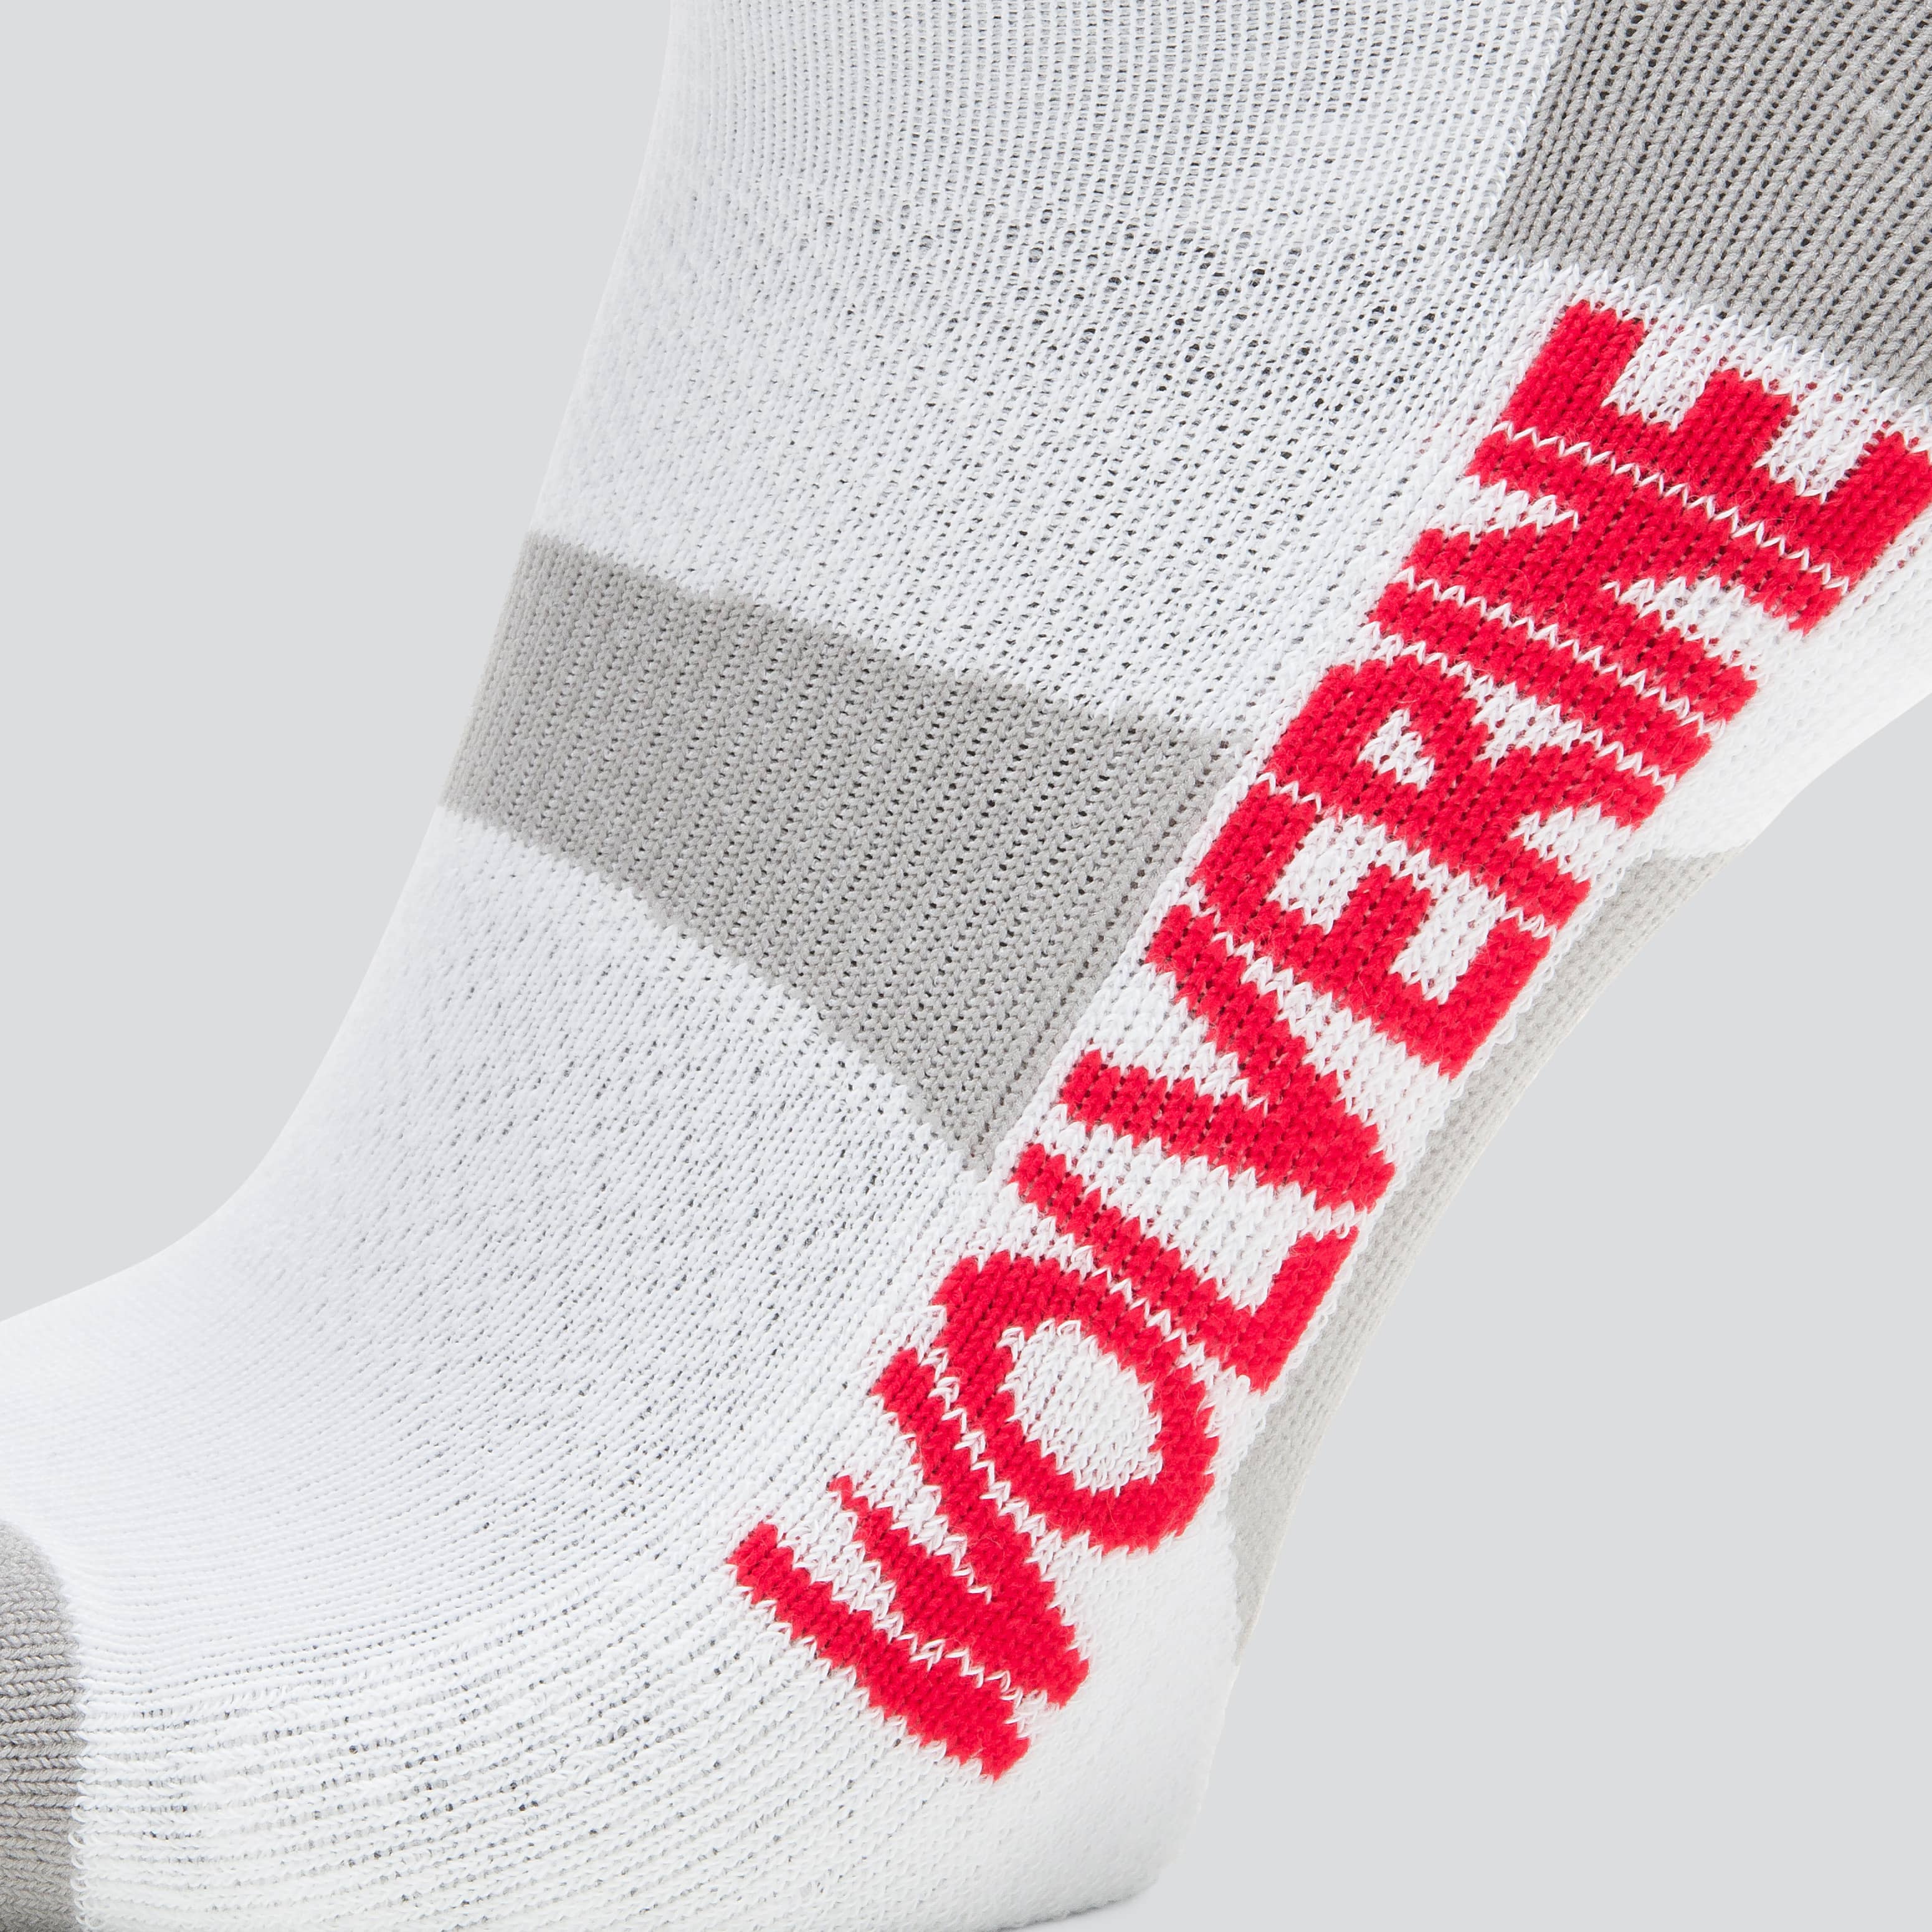 High quality socks from Wolverine